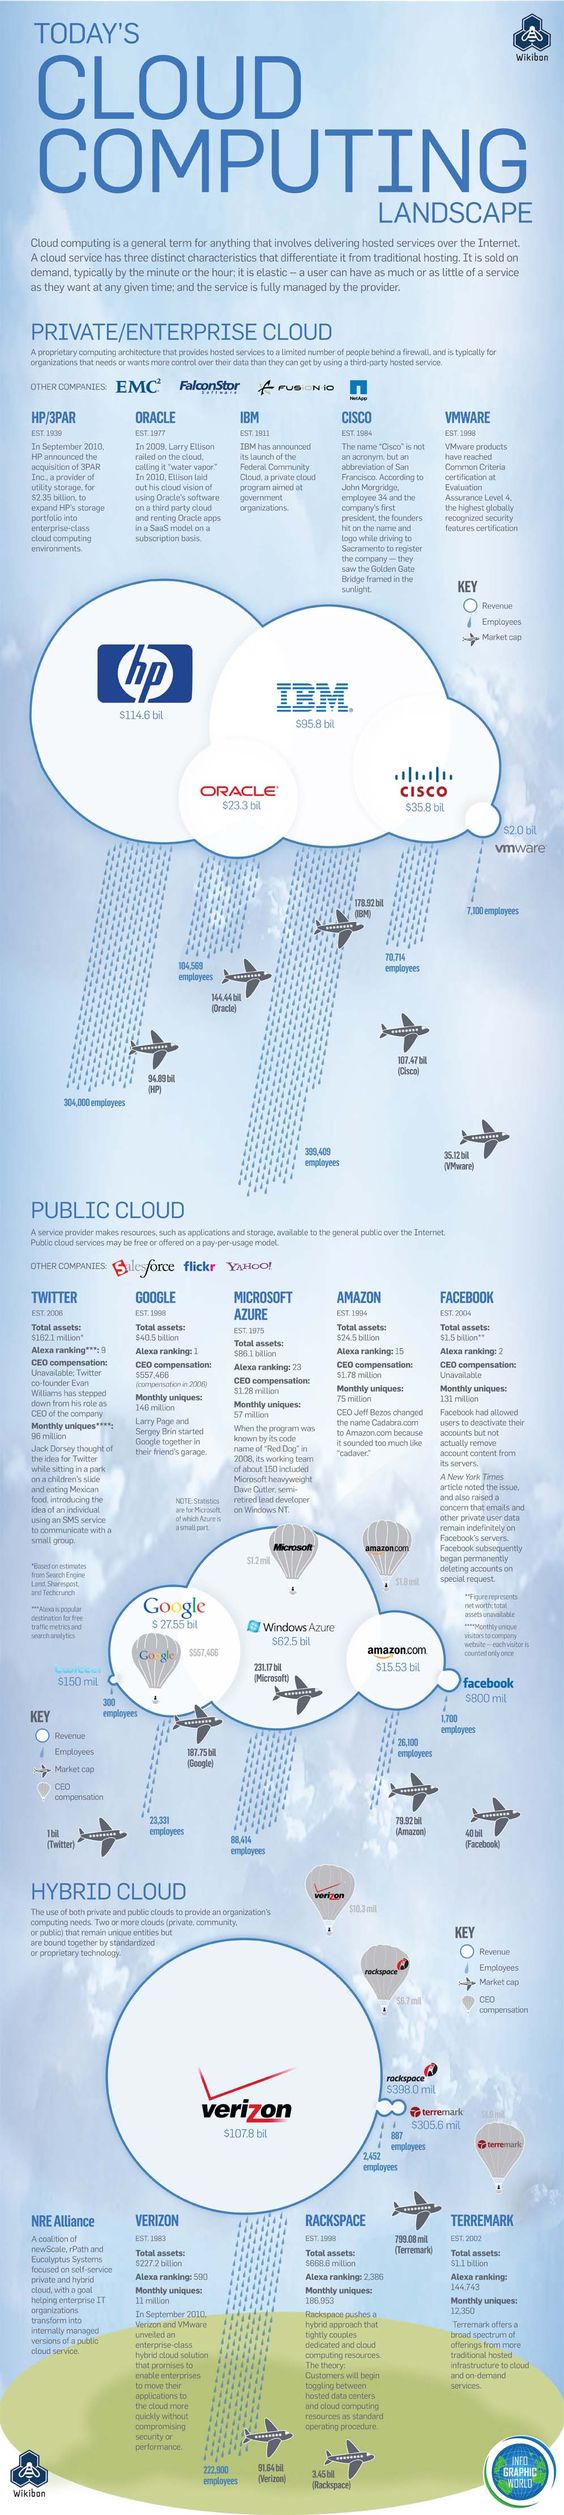 A Muddled Look at Today's Cloud Computing Landscape [Infographic]